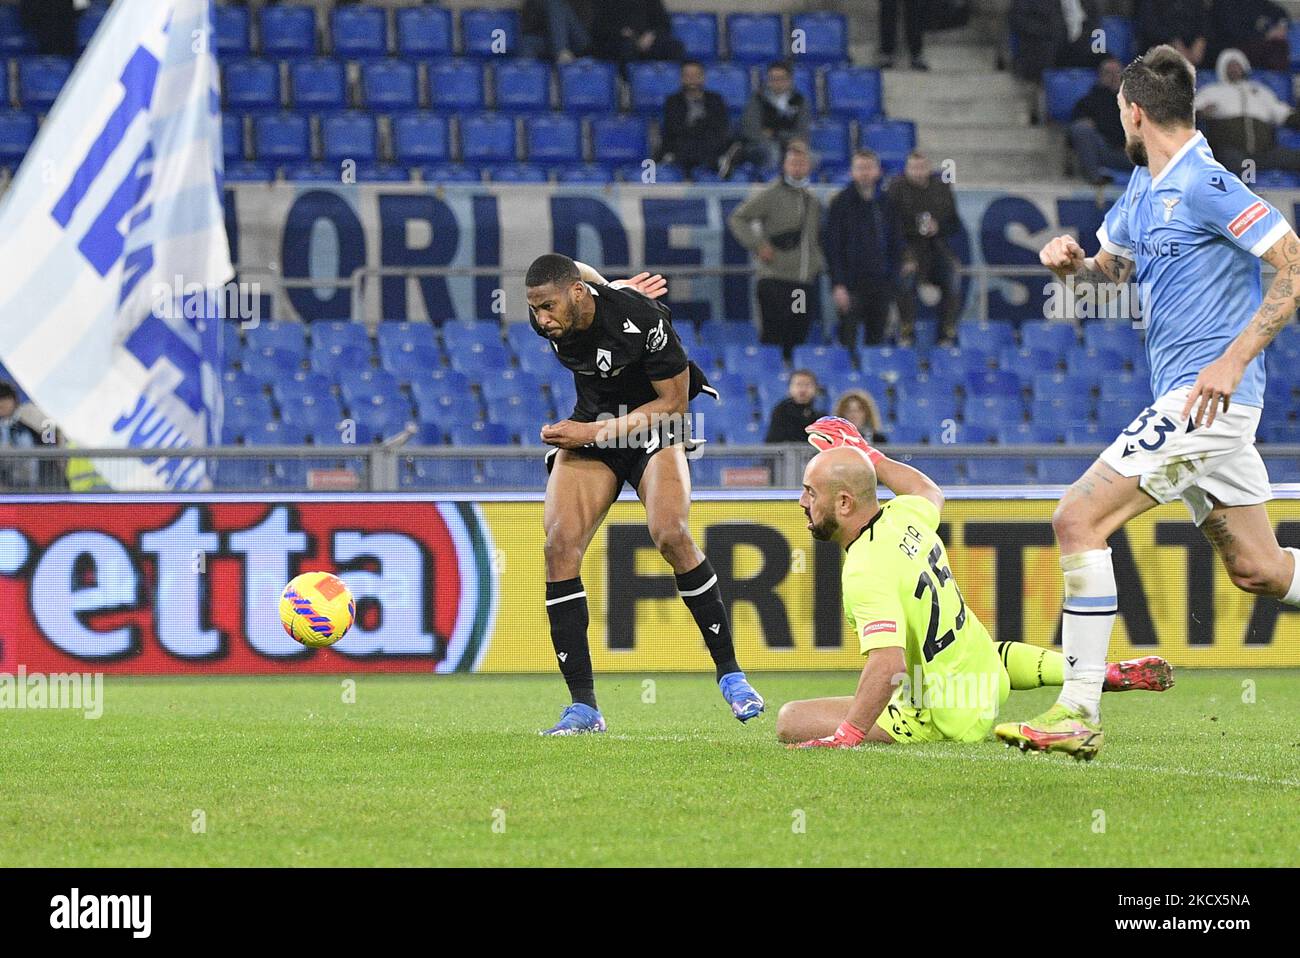 Norberto Bercique Gomes Betuncal (Udinese) gol 0-2 during the Italian Football Championship League A 2021/2022 match between SS Lazio vs Udinese Calcio at the Olimpic Stadium in Rome on 02 December 2021. (Photo by Fabrizio Corradetti/LiveMedia/NurPhoto) Stock Photo